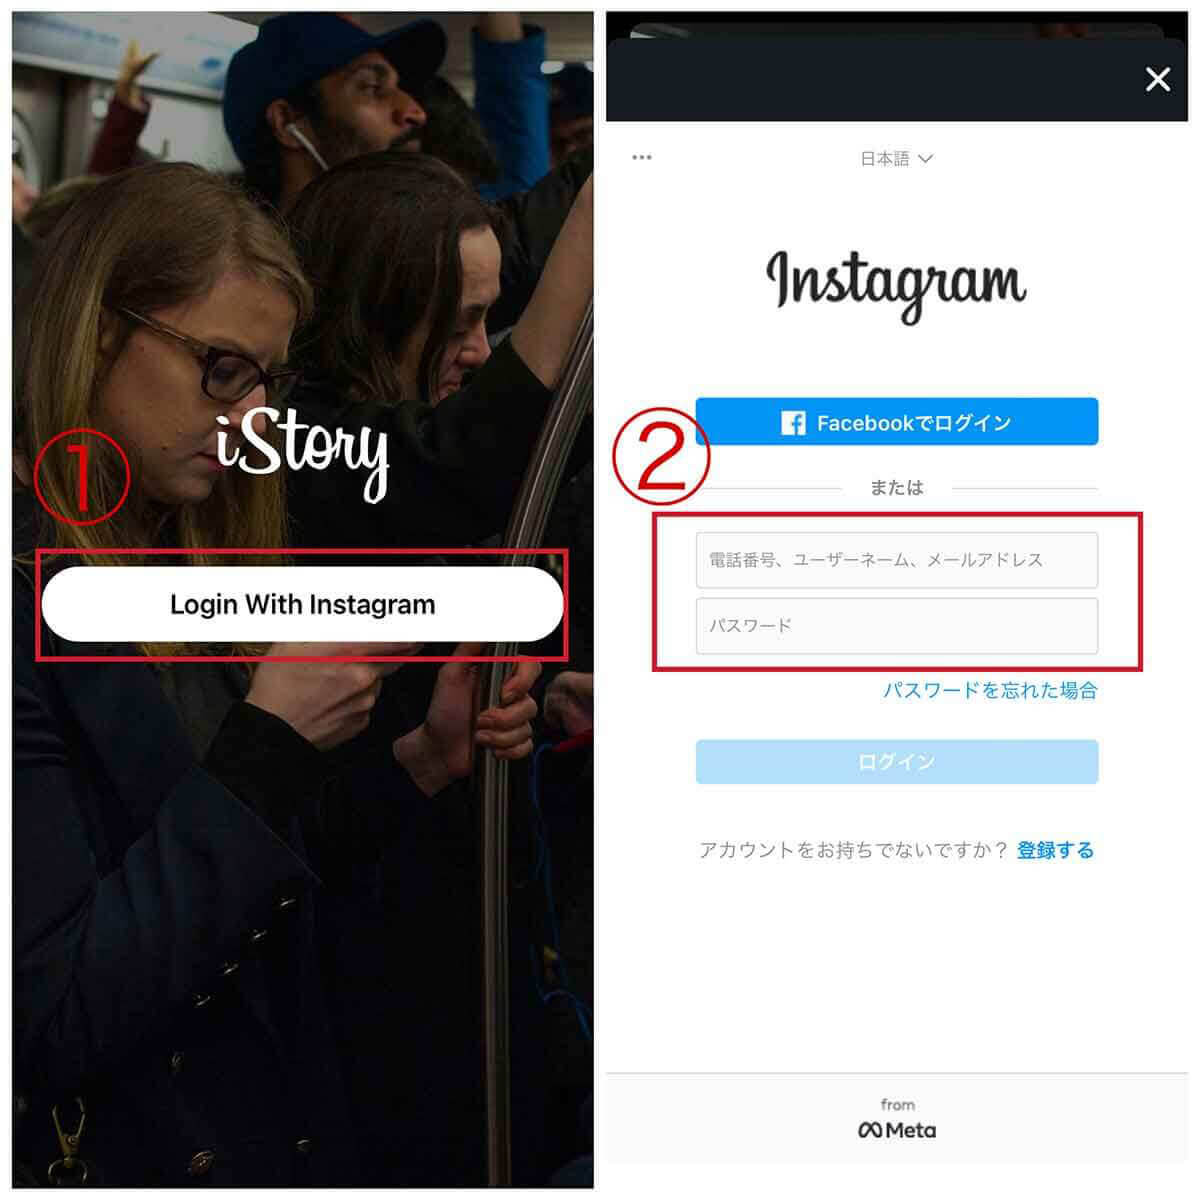 iStory for Instagram | ストーリーズのみ閲覧/保存が可能1